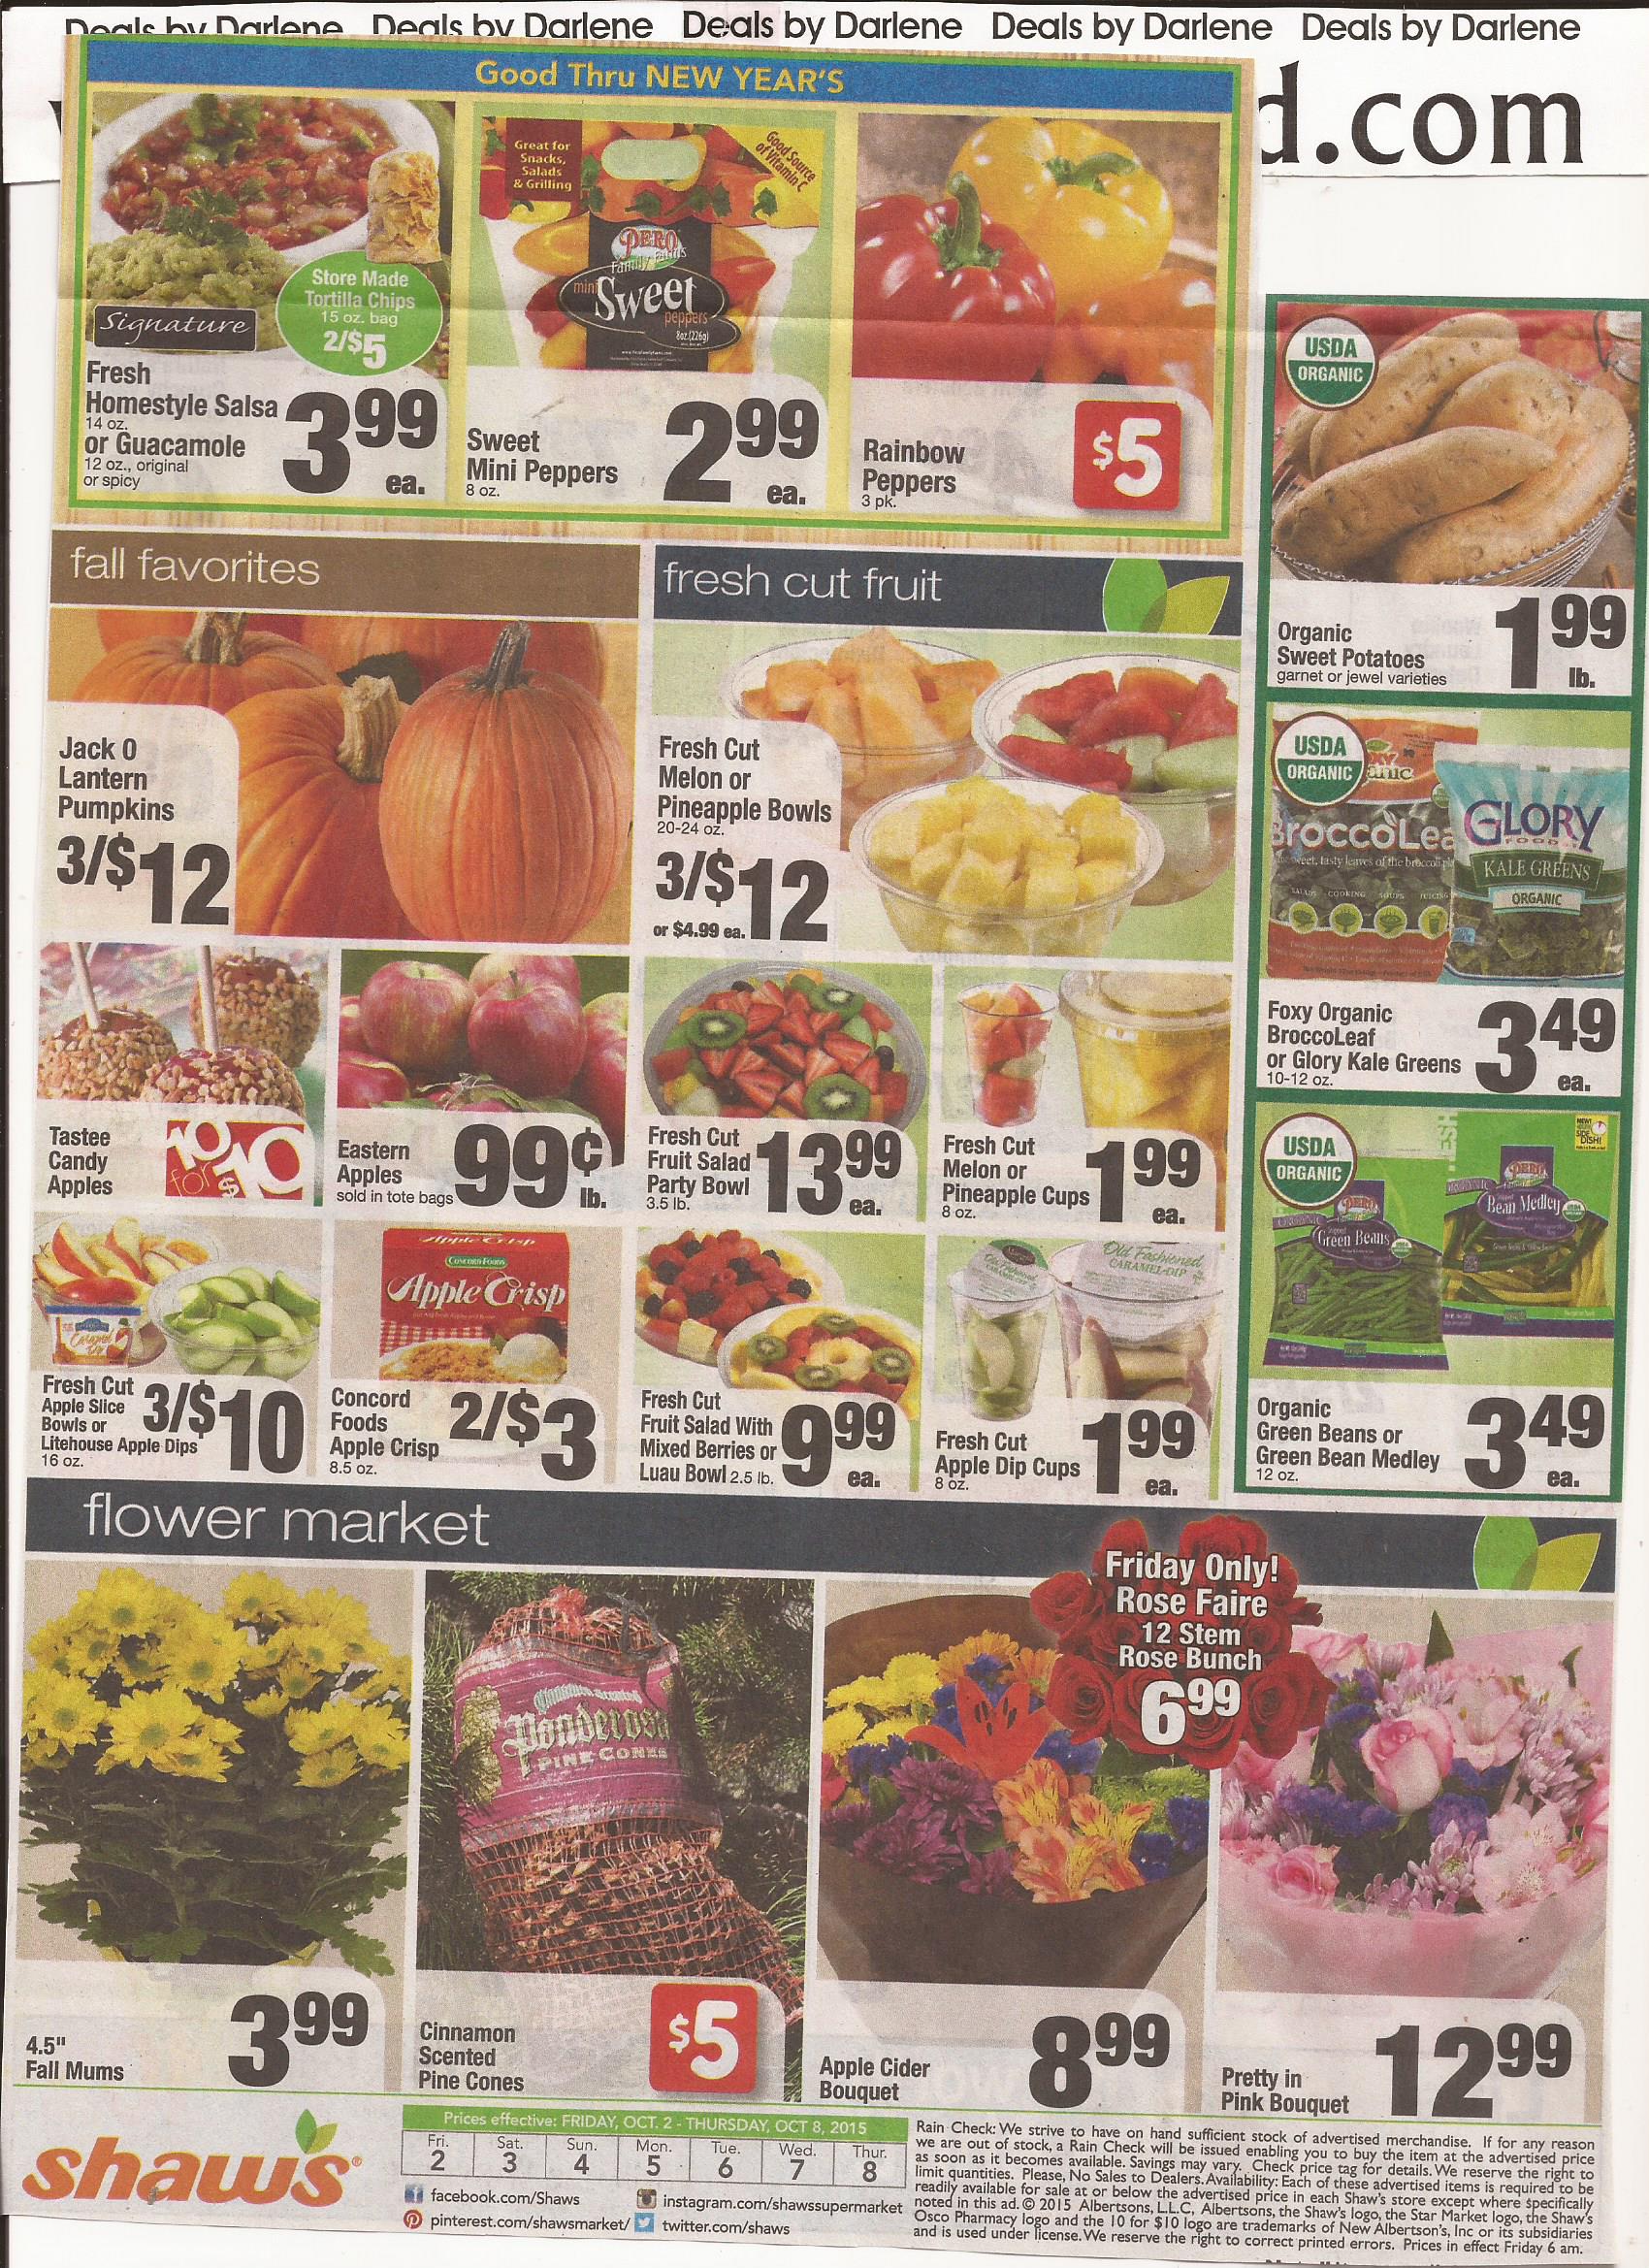 shaws-flyer-oct-2-oct-8-page-8b